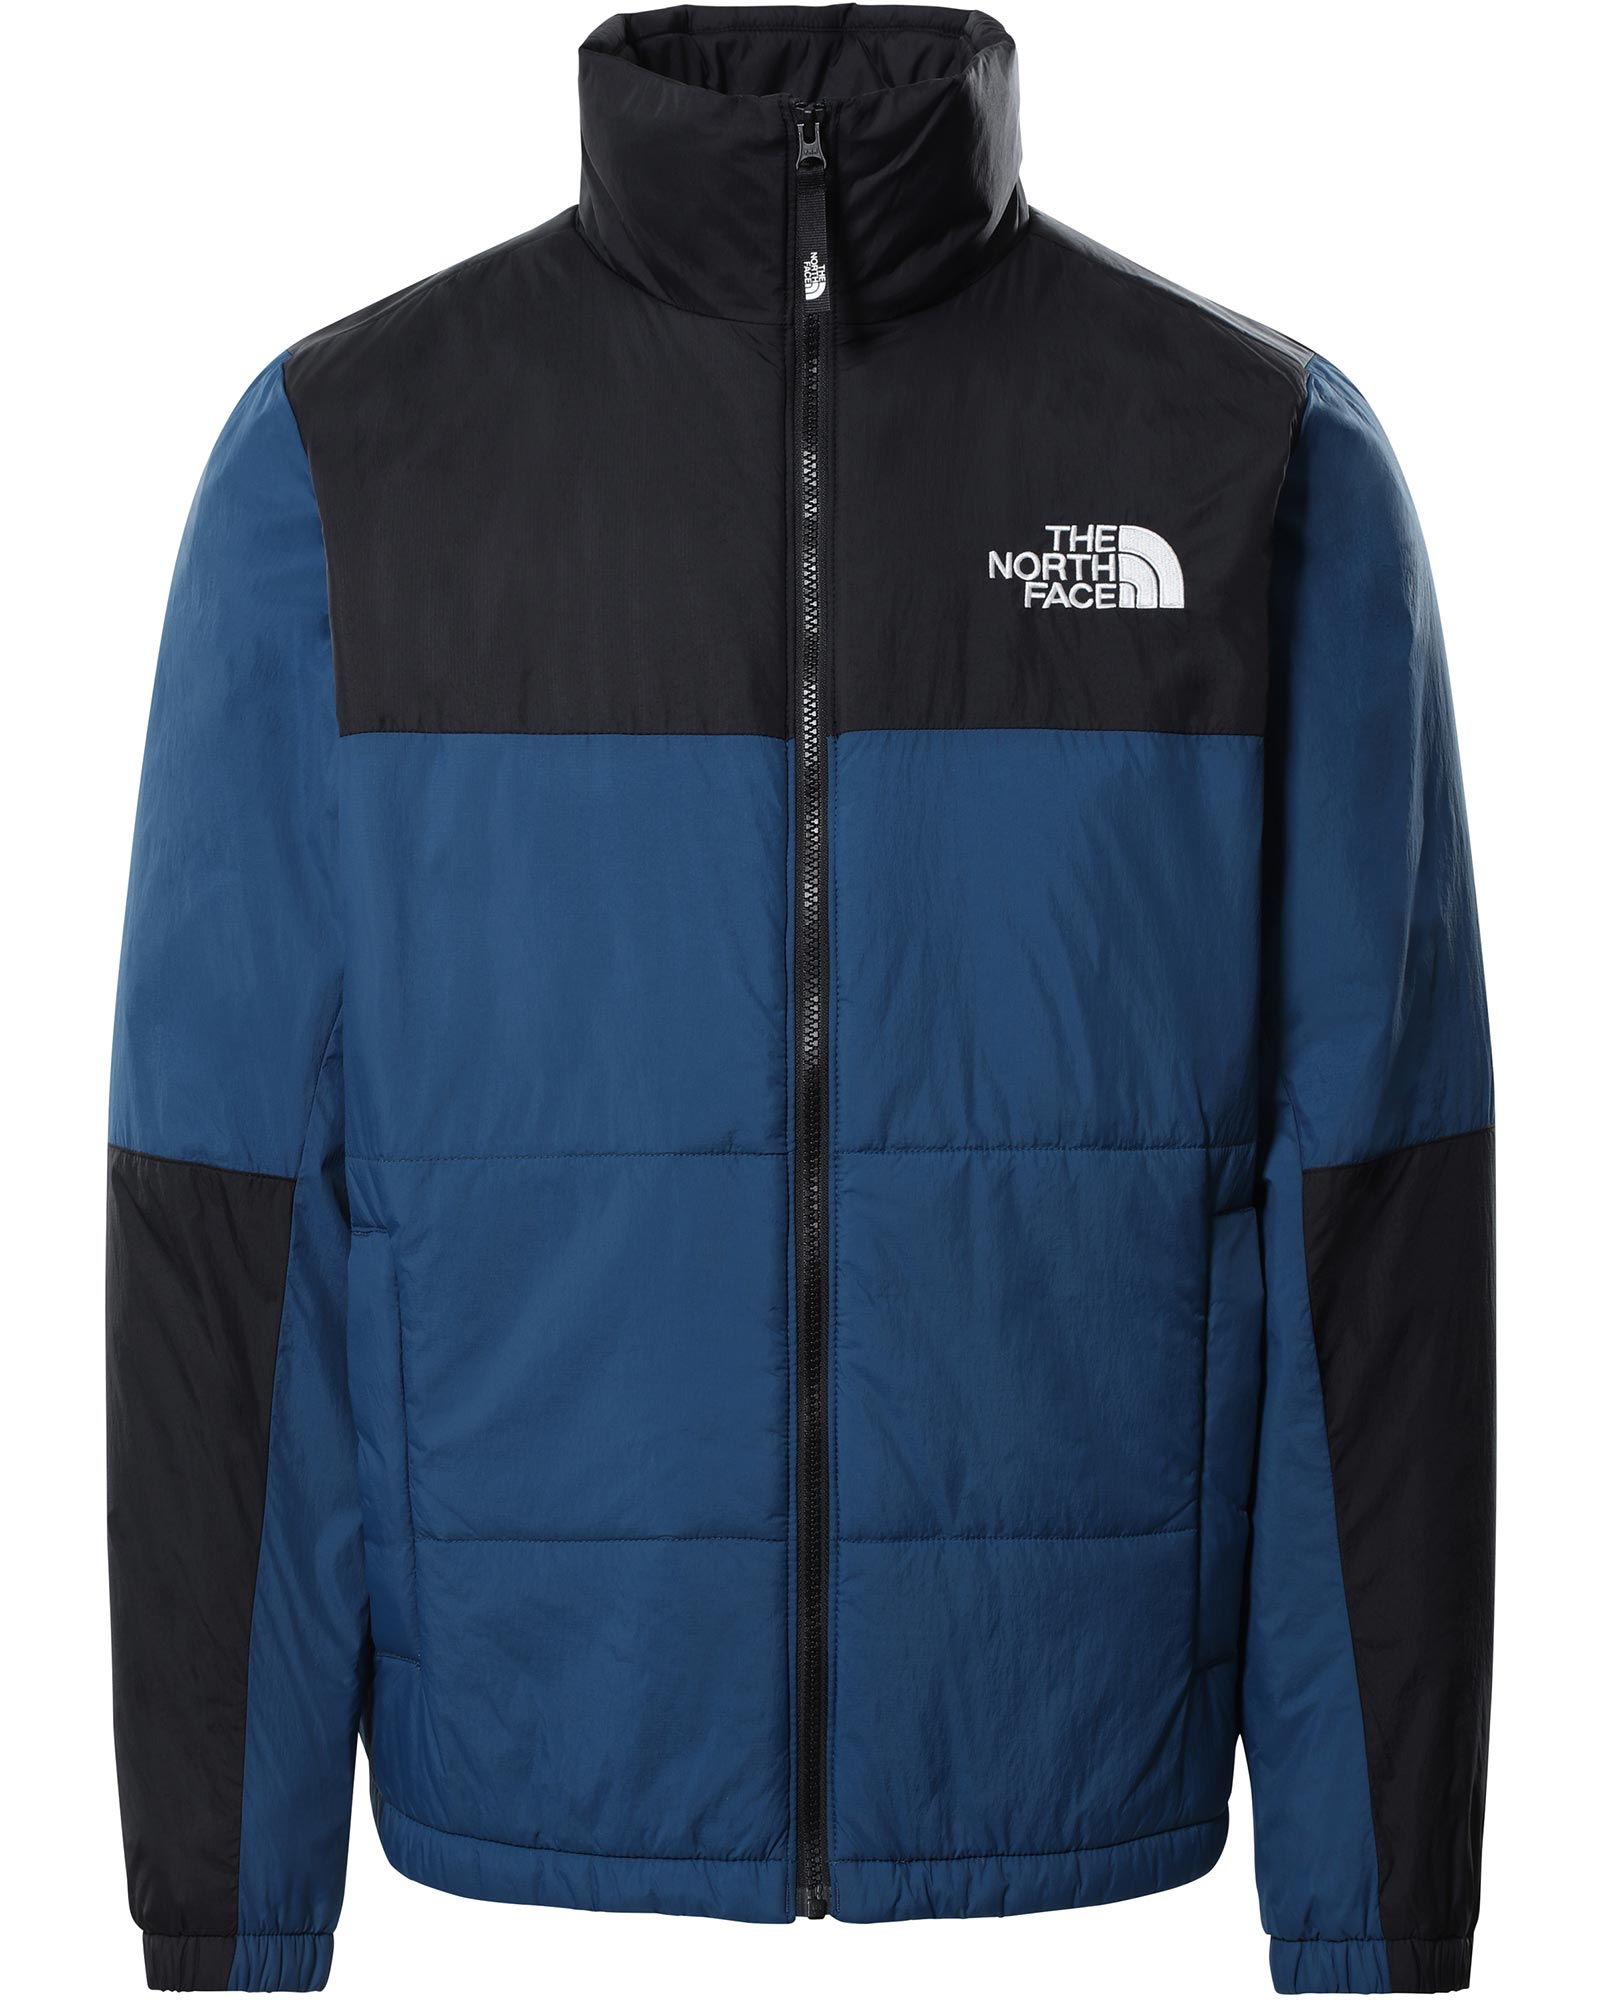 The North Face Gosei Puffer Men’s Insulated Jacket - Monterey Blue XS